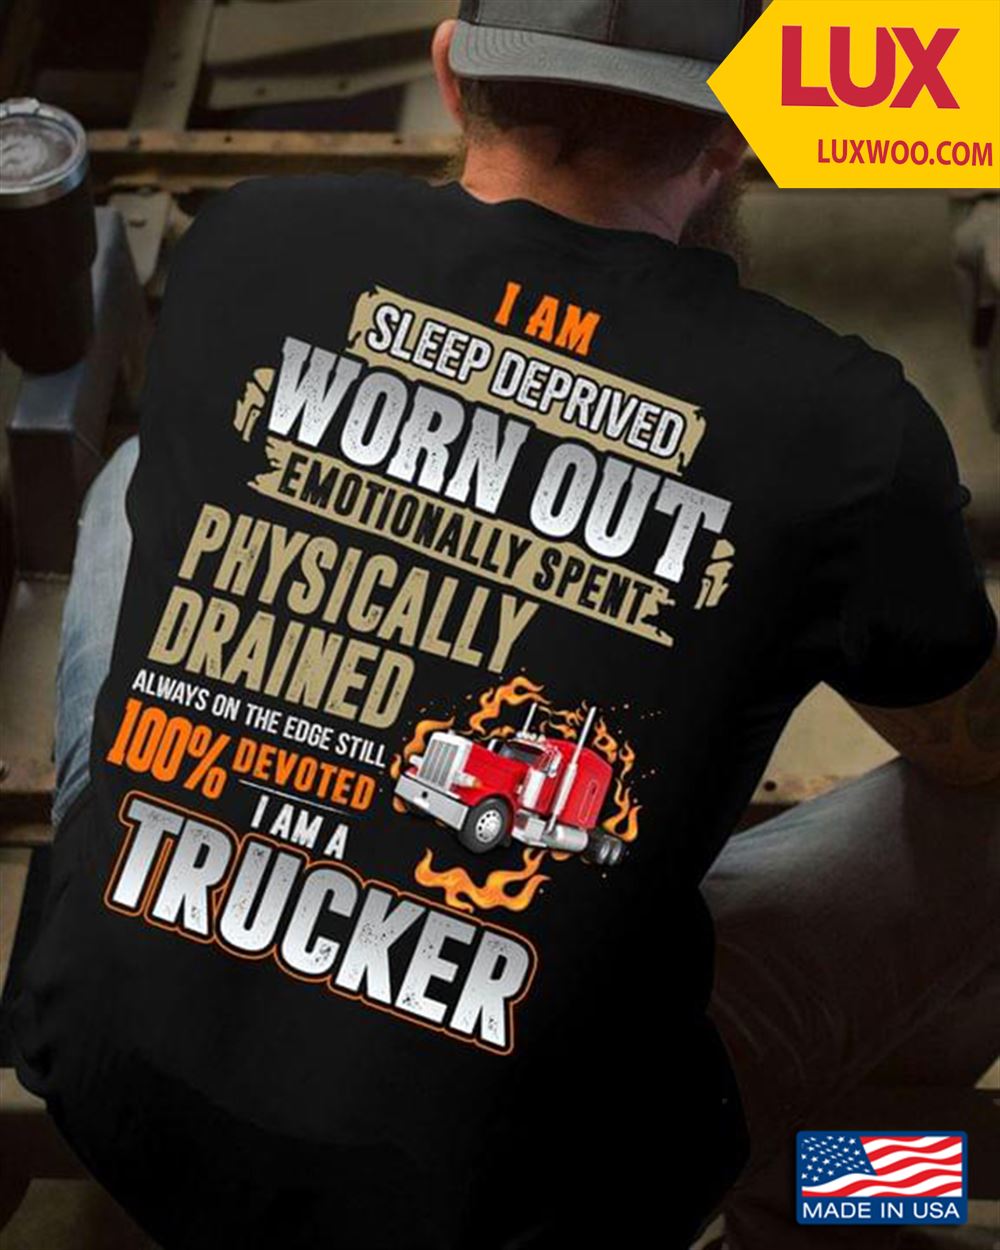 Trucker I Am Sleep Deprived Worn Out Emotionally Spent Physically Drained Always On The Edge Shirt Size Up To 5xl